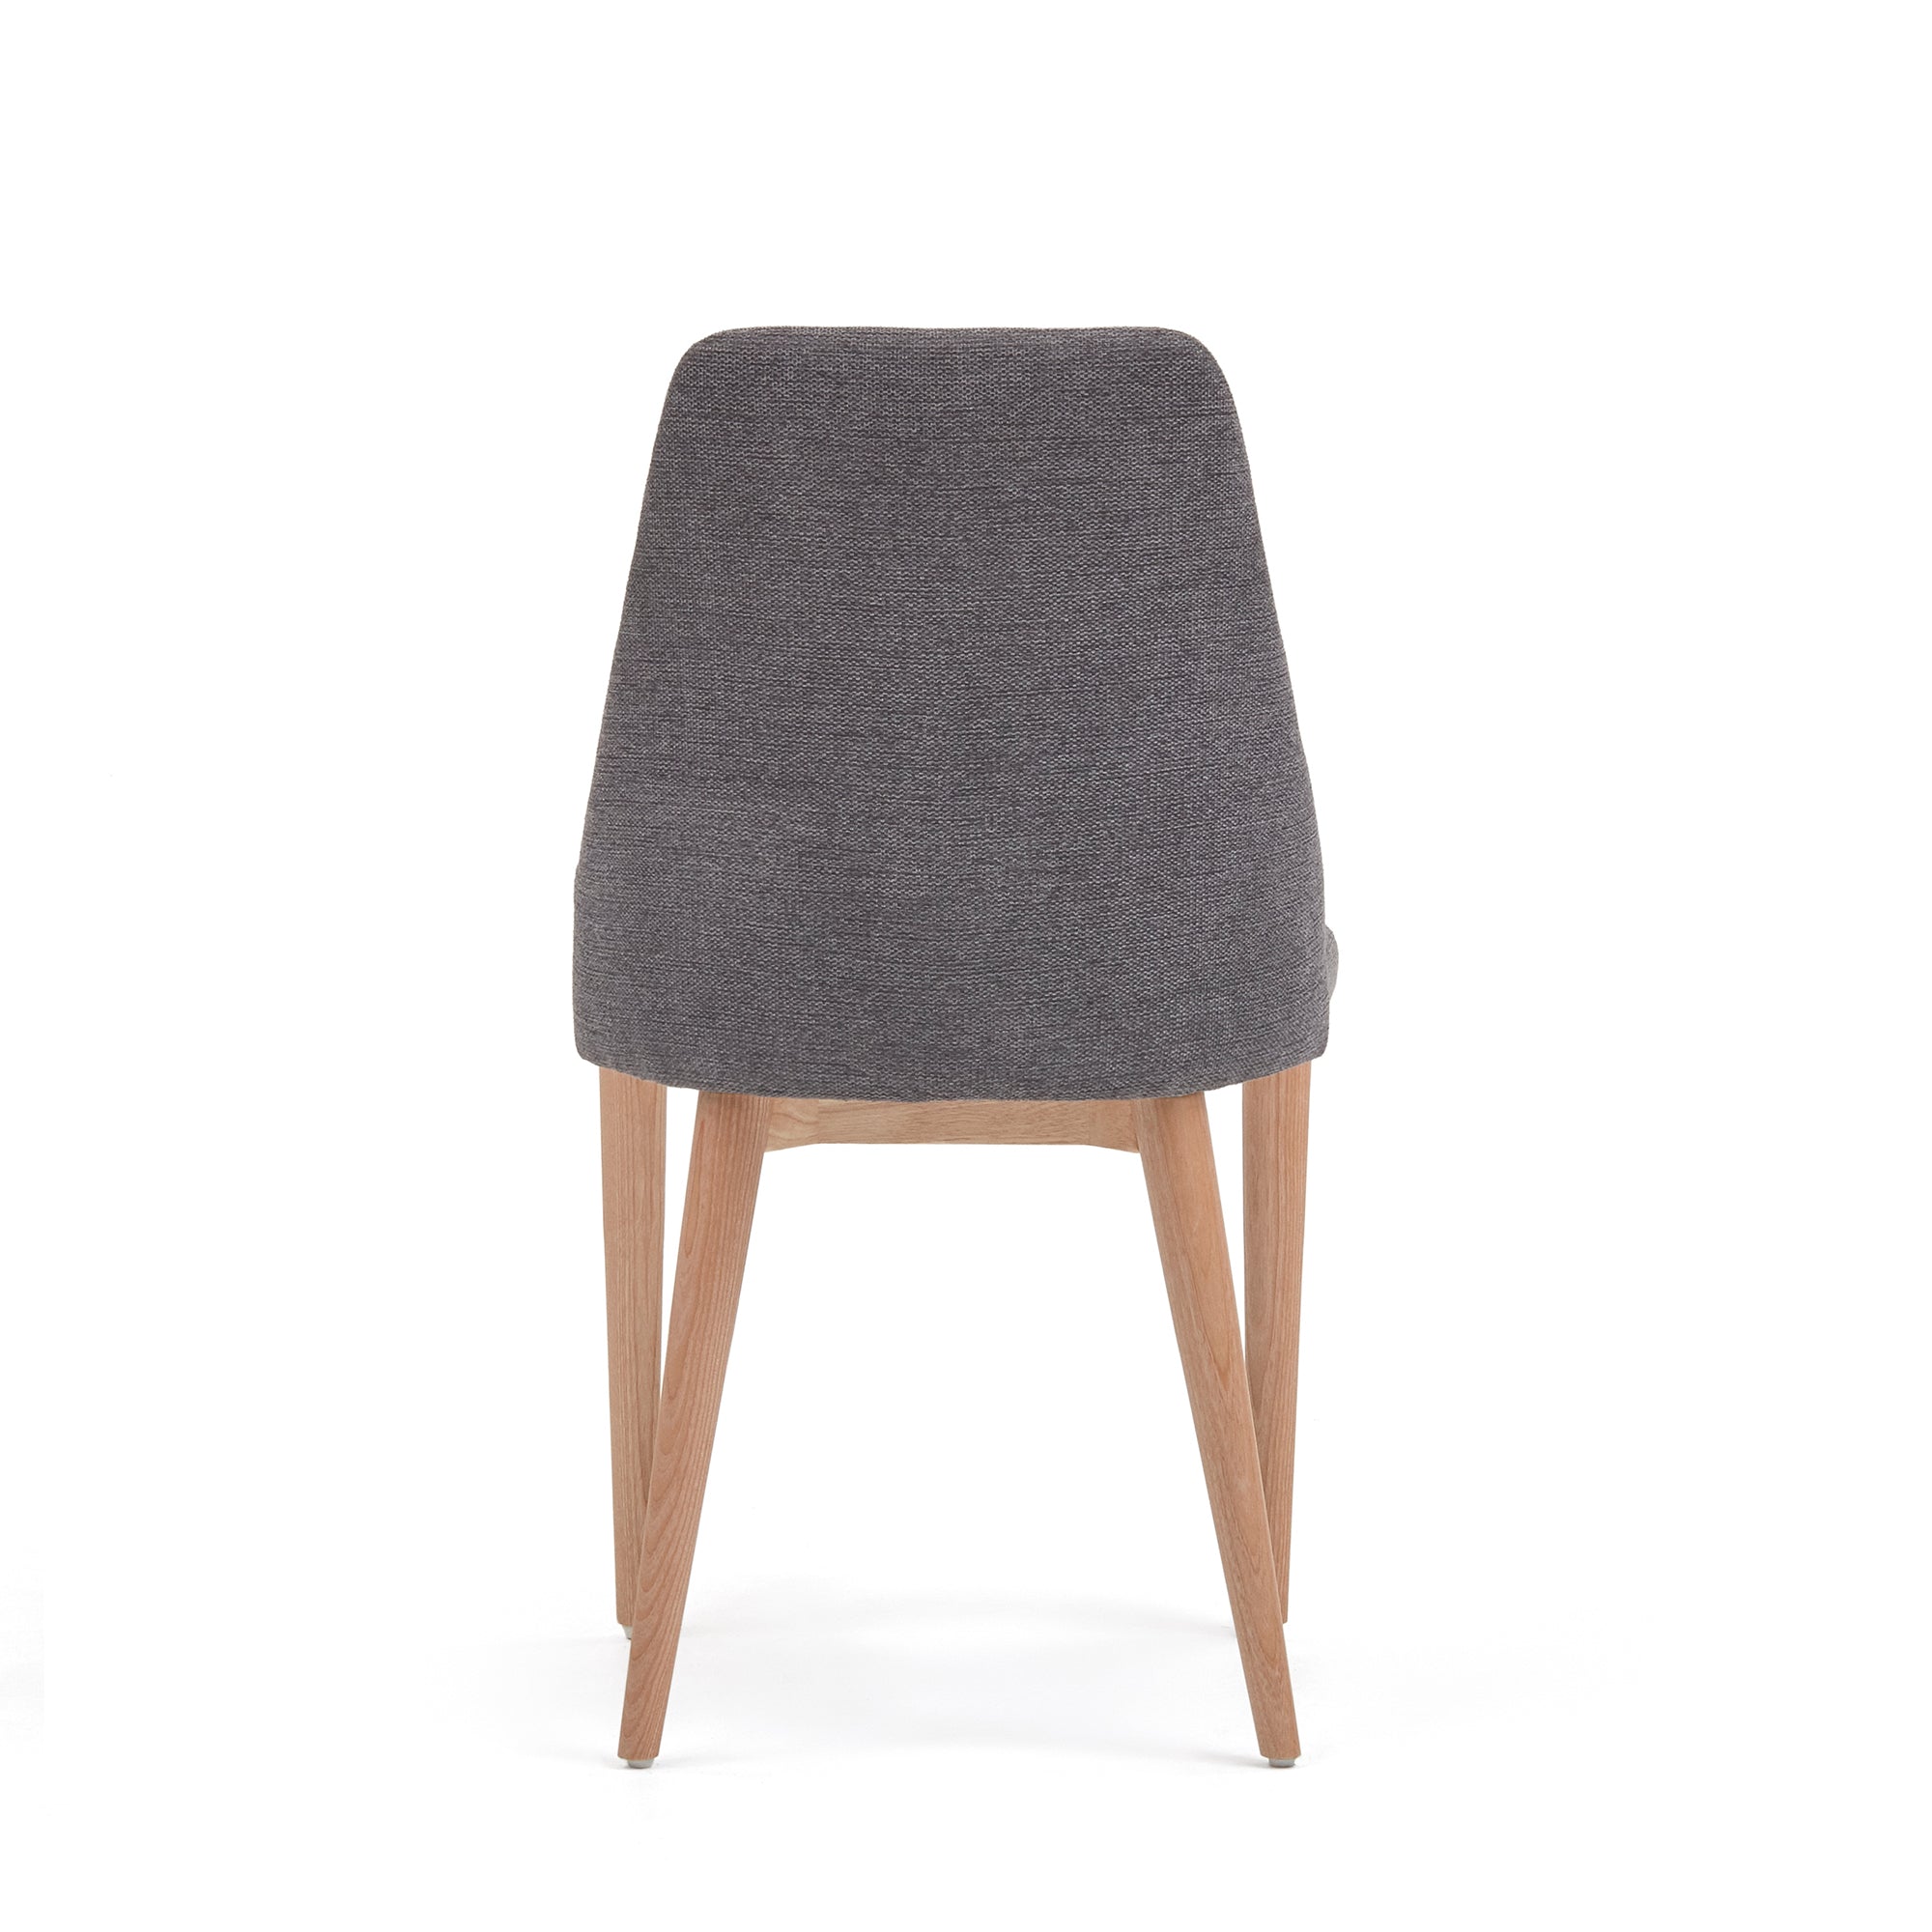 Rosie chair in dark grey chenille with solid ash wood legs in a natural finish